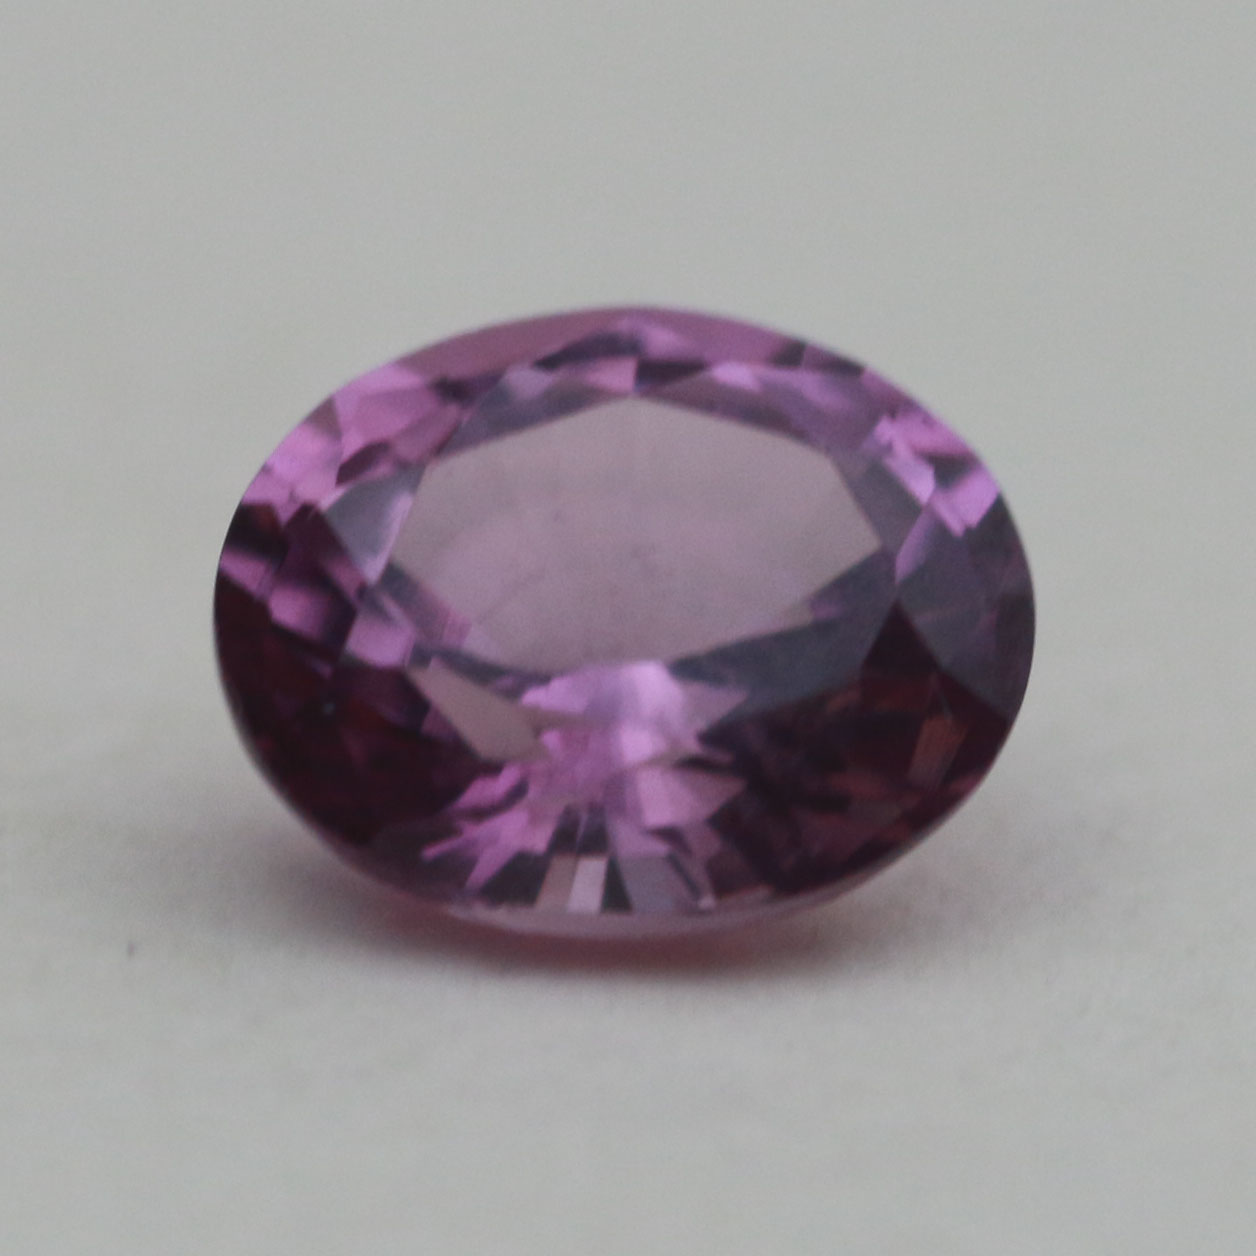 PINK SAPPHIRE 5.9X4.8 OVAL 0.74CT